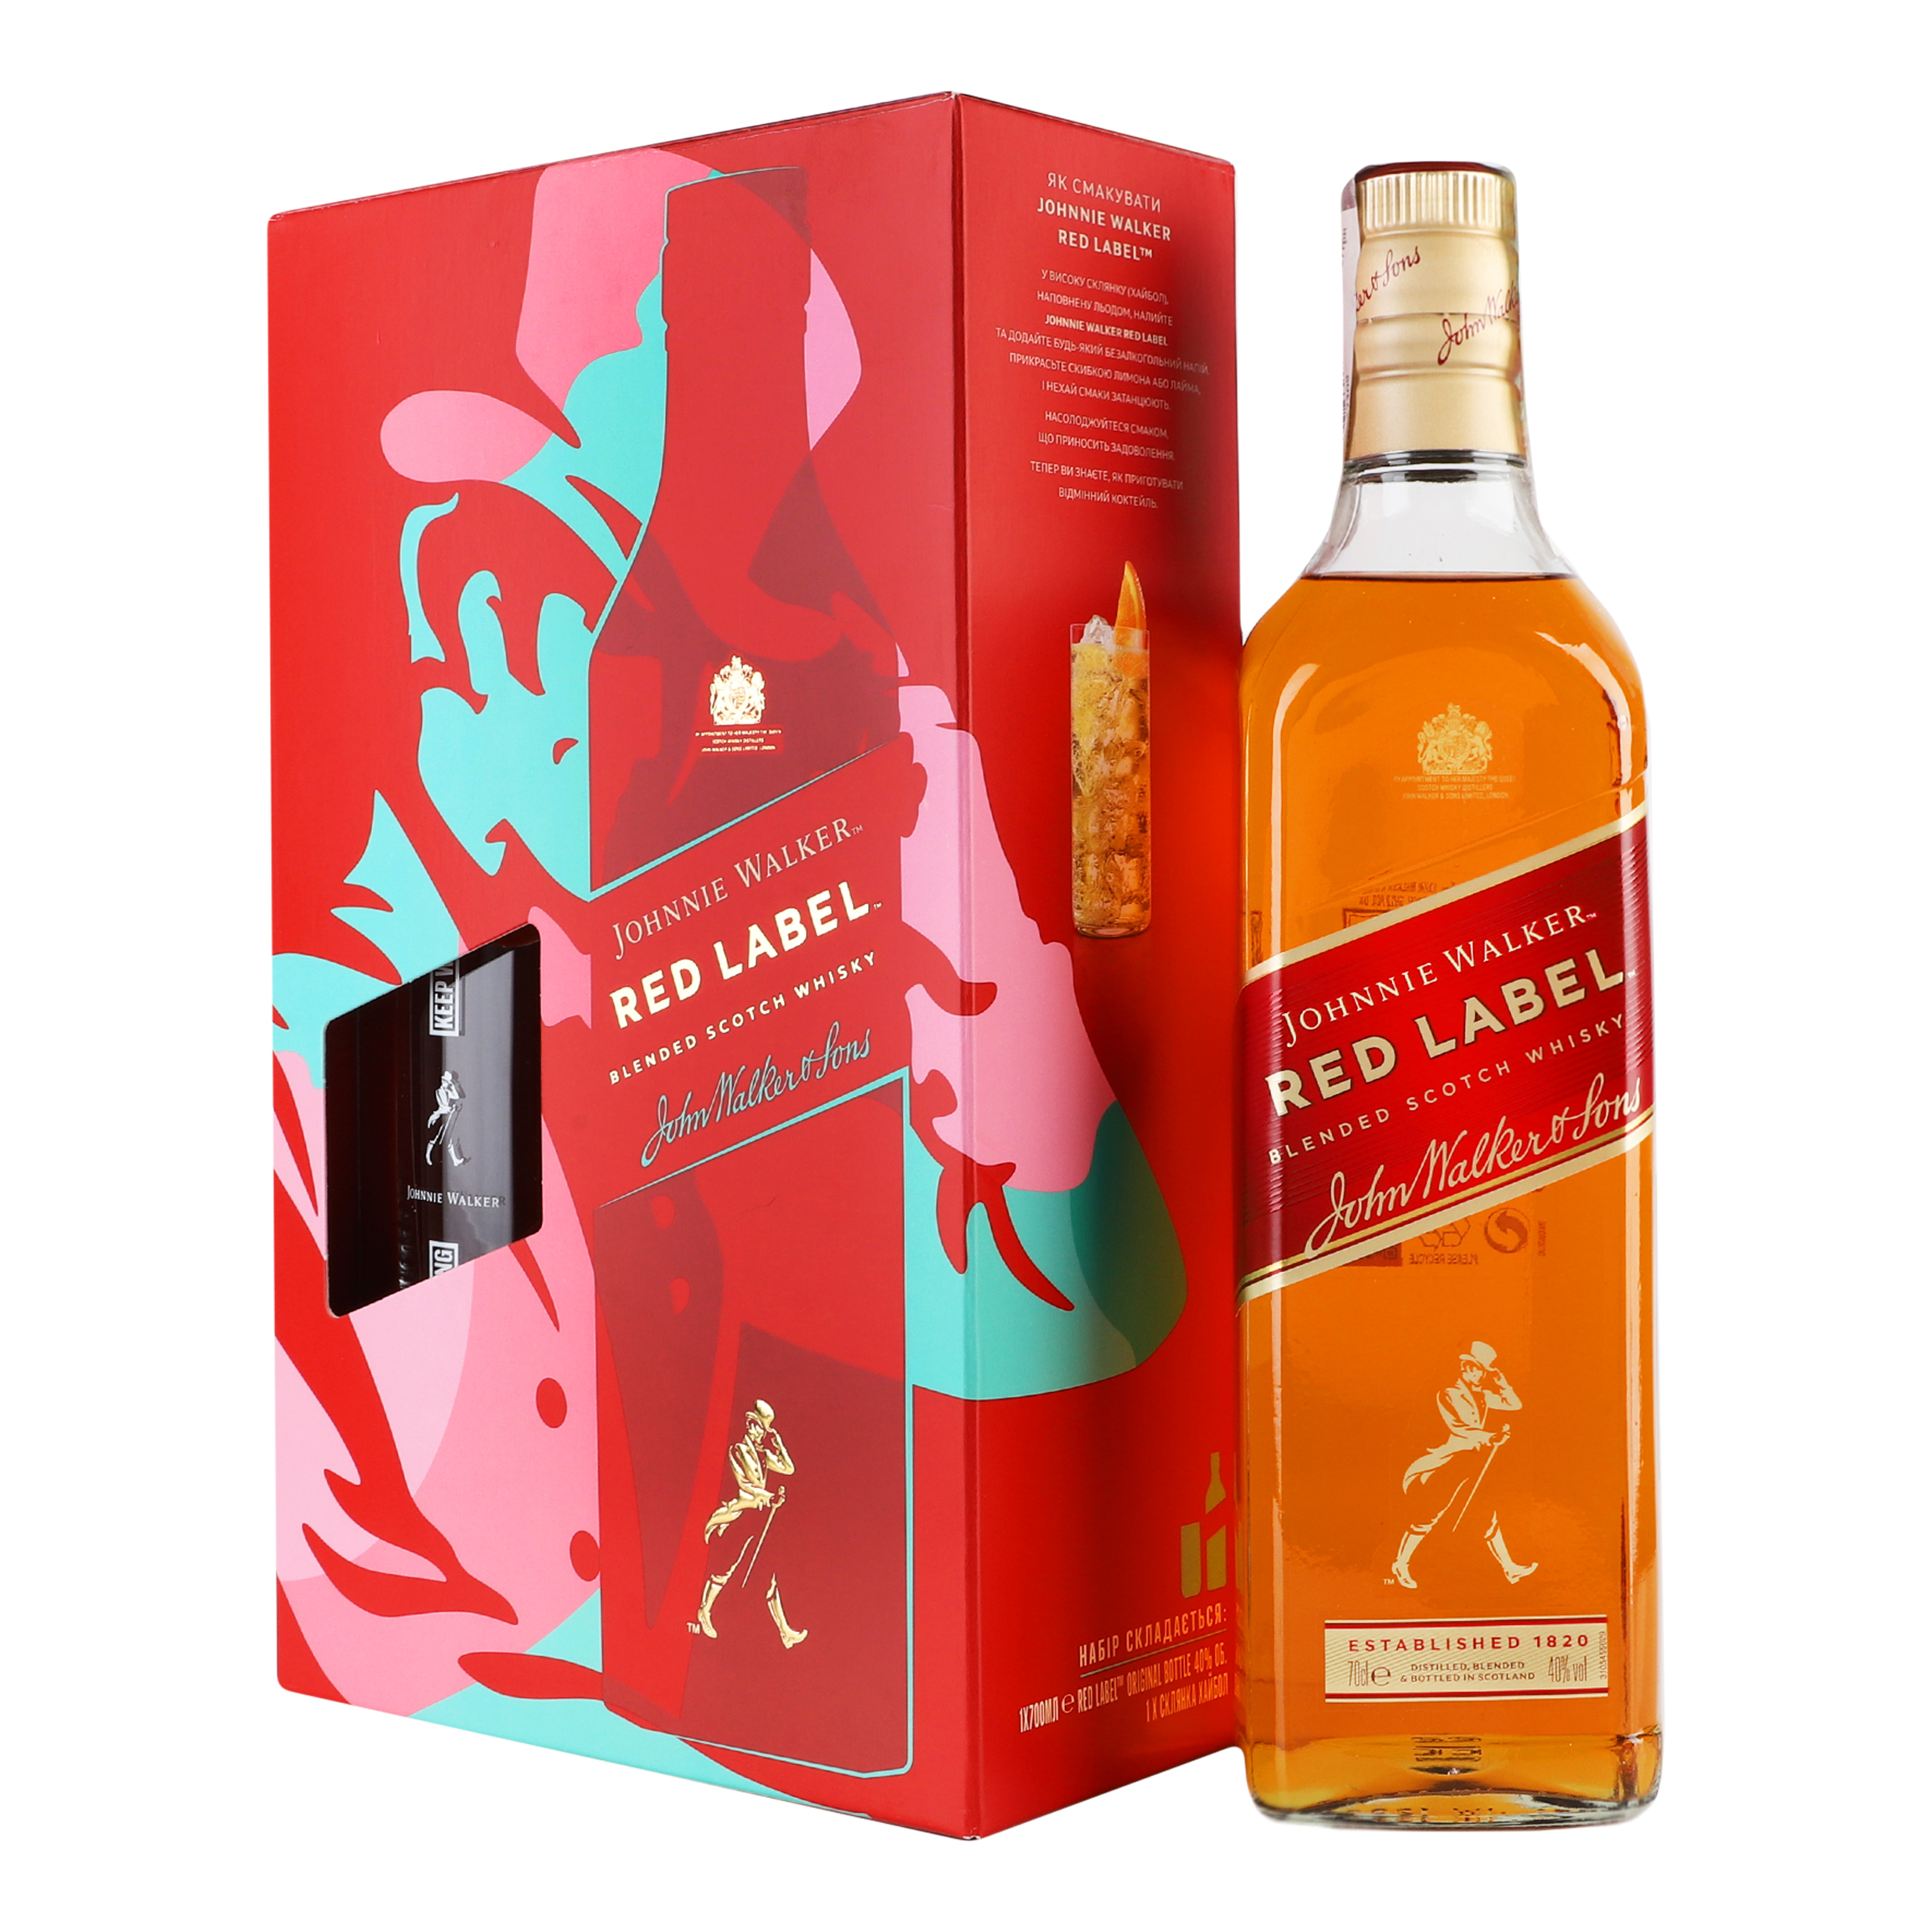 Набор: виски Johnnie Walker Red label Blended Scotch Whisky 40%, 0,7 л + 2 бокала - фото 4